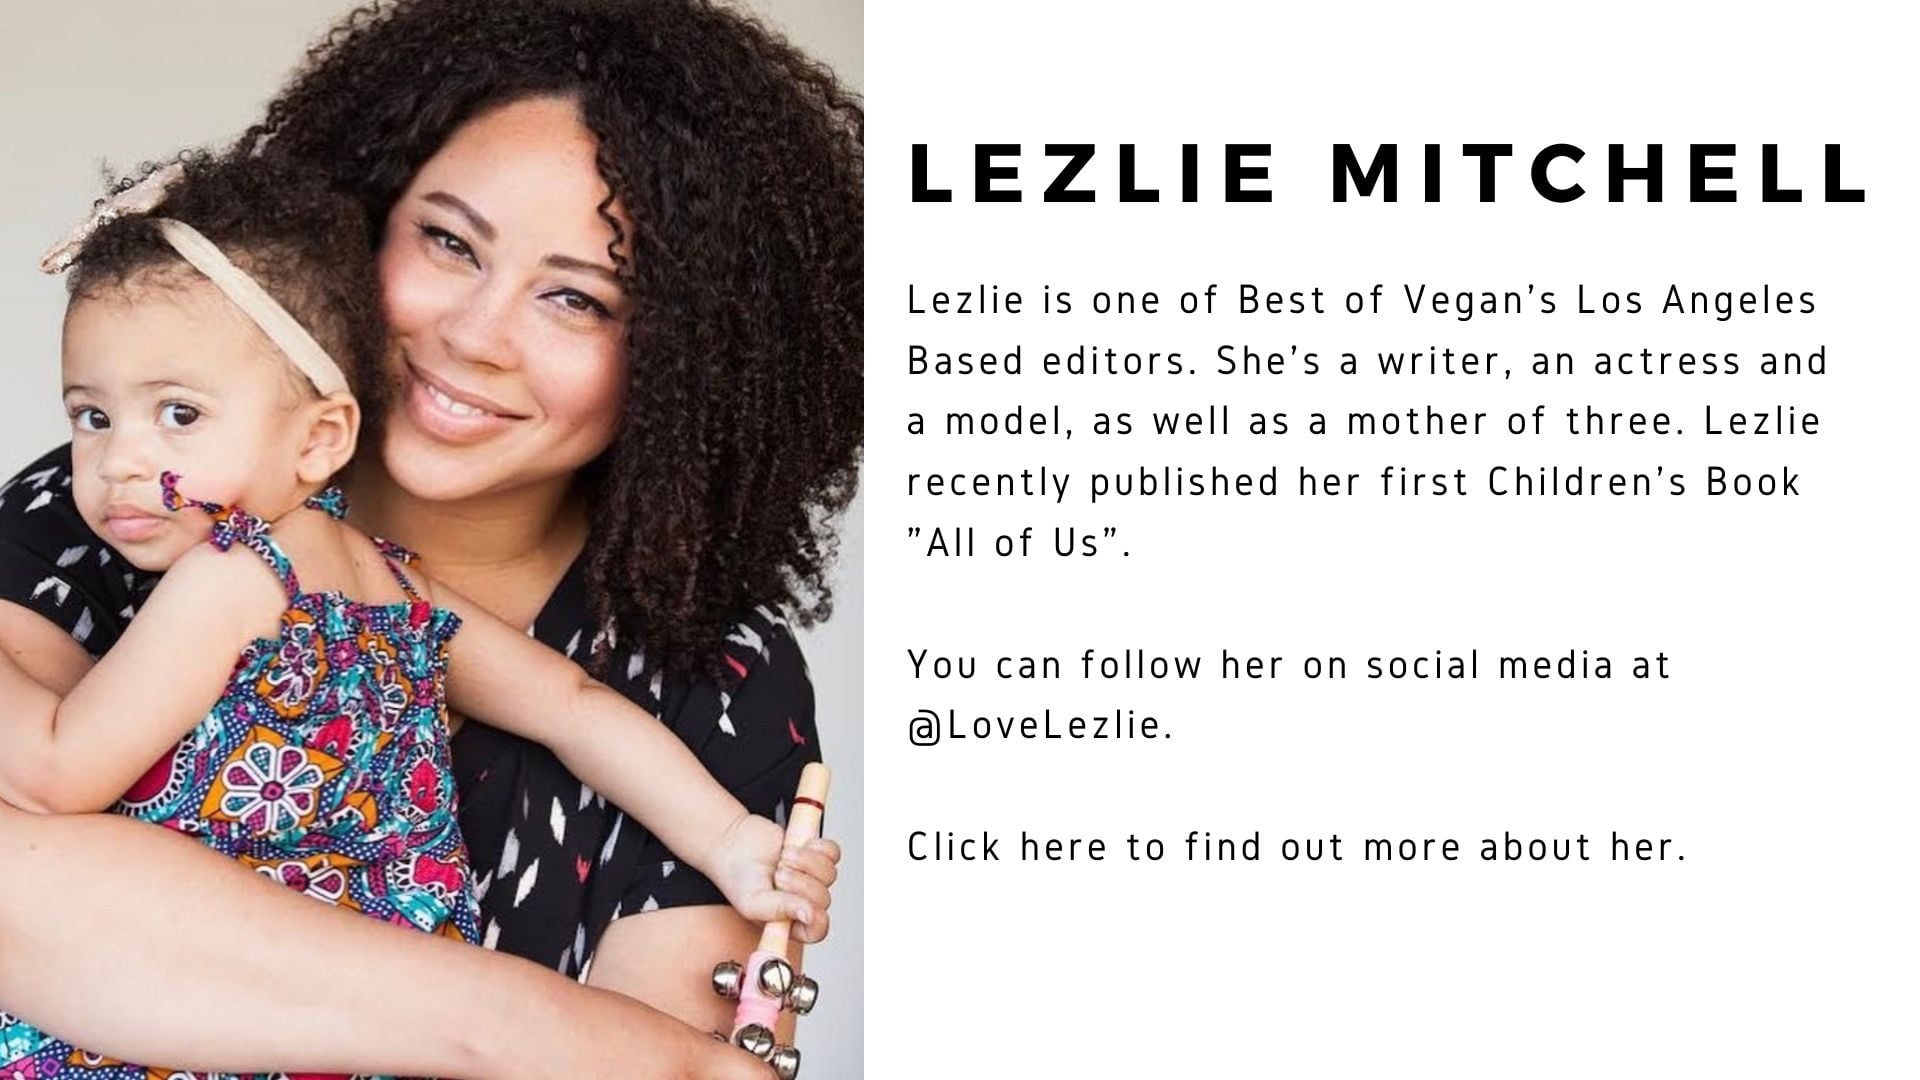 Lezlie Mitchell is pictured with her child. Lezlie is one of Best of Vegan's Los Angeles Basededitors. She's a writer, an actress and a model, as well as a mother of three. Lezlie recently published her first children's book "All of Us". You can follow her on social media @LoveLezlie. Click here to find out more about her.